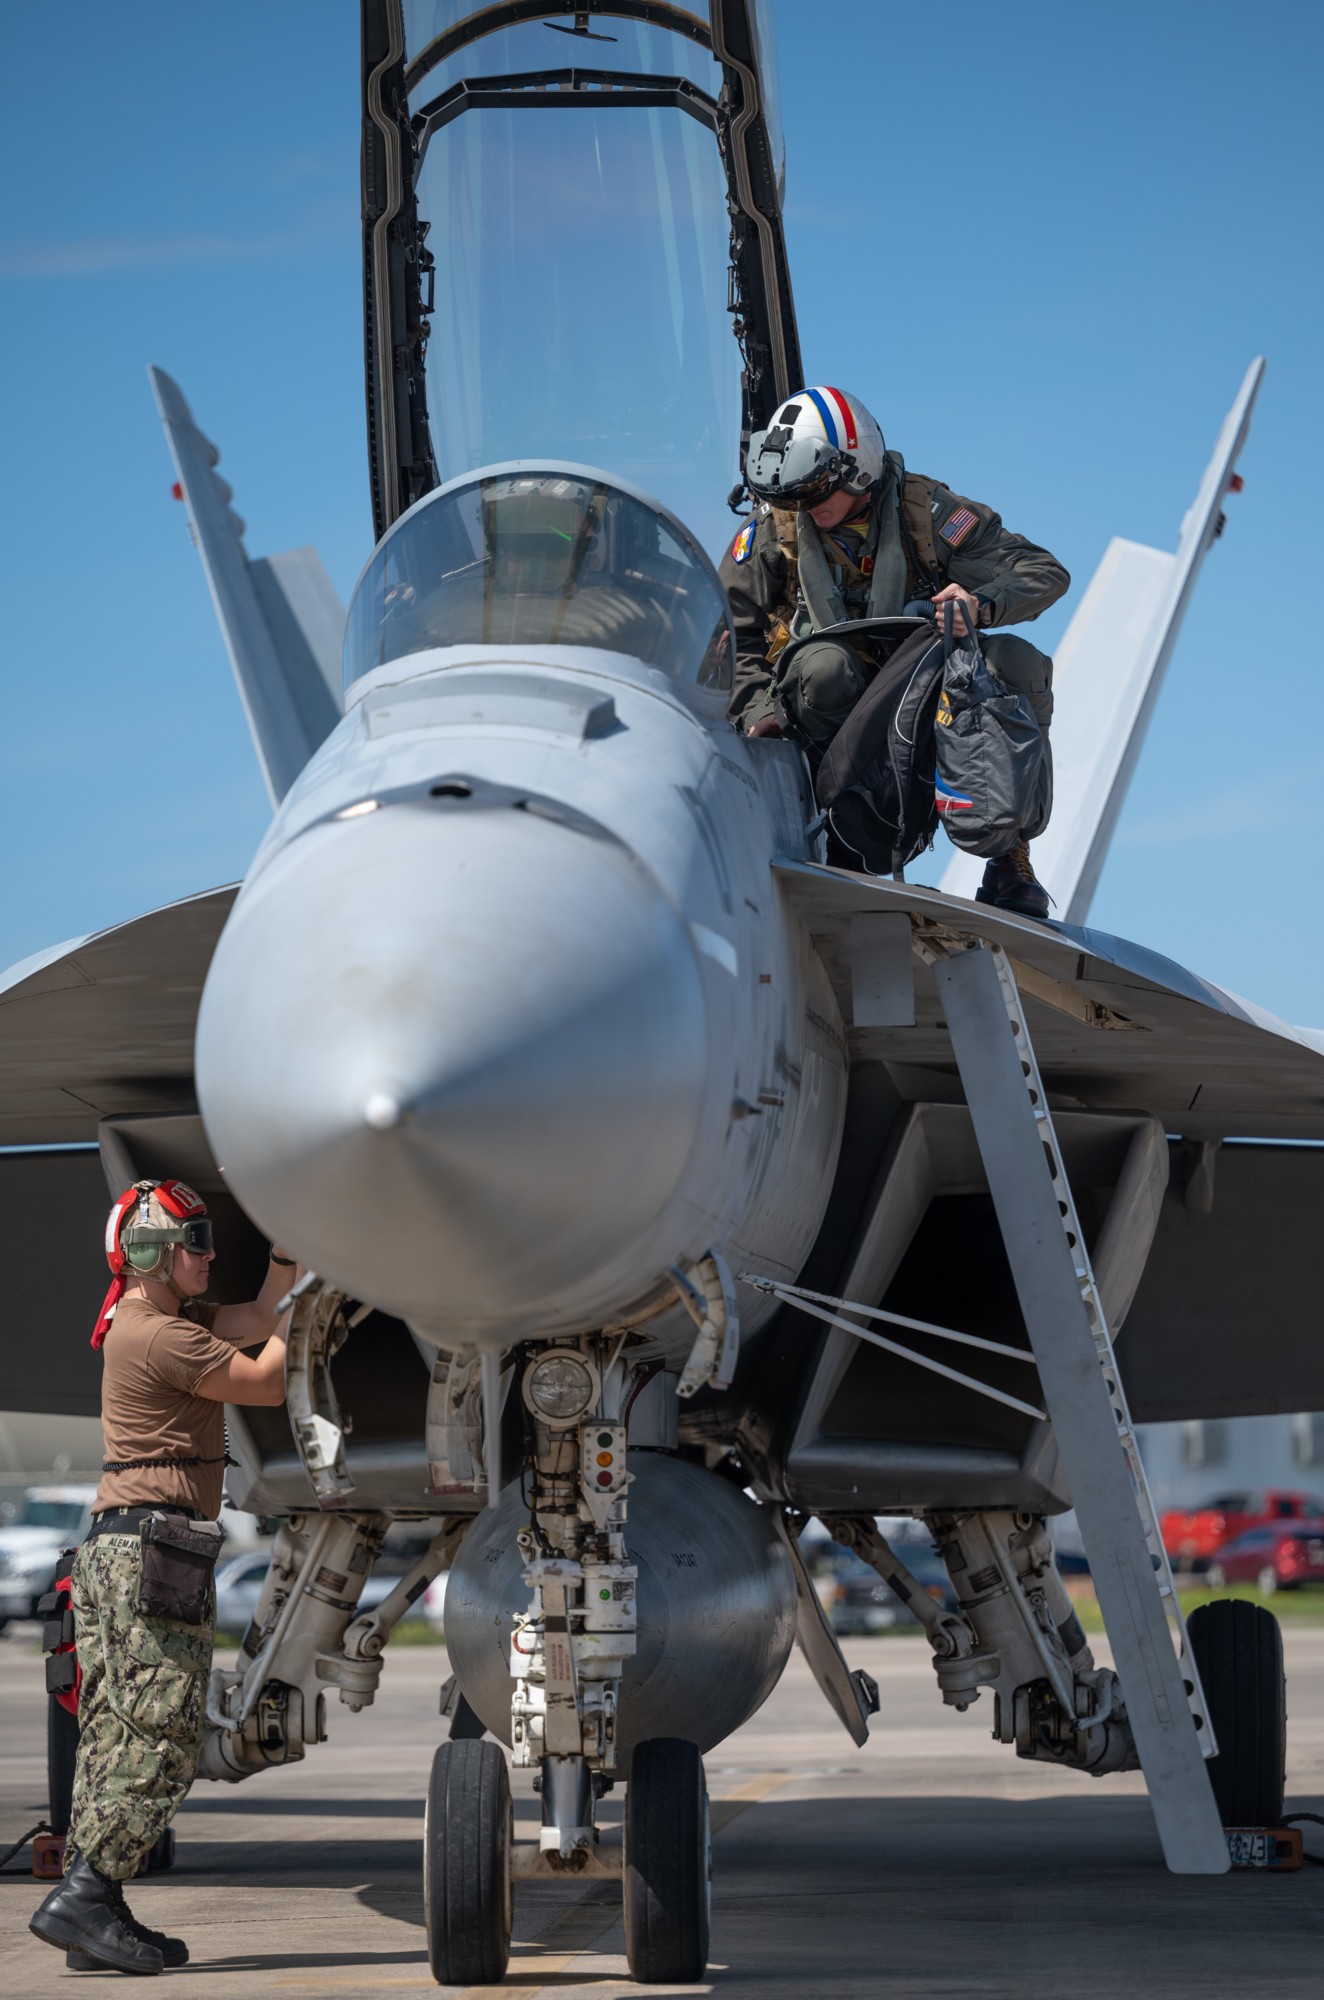 vfa-2 bounty hunters strike fighter squadron us navy f/a-18f super hornet tyndall afb florida wsep east 122